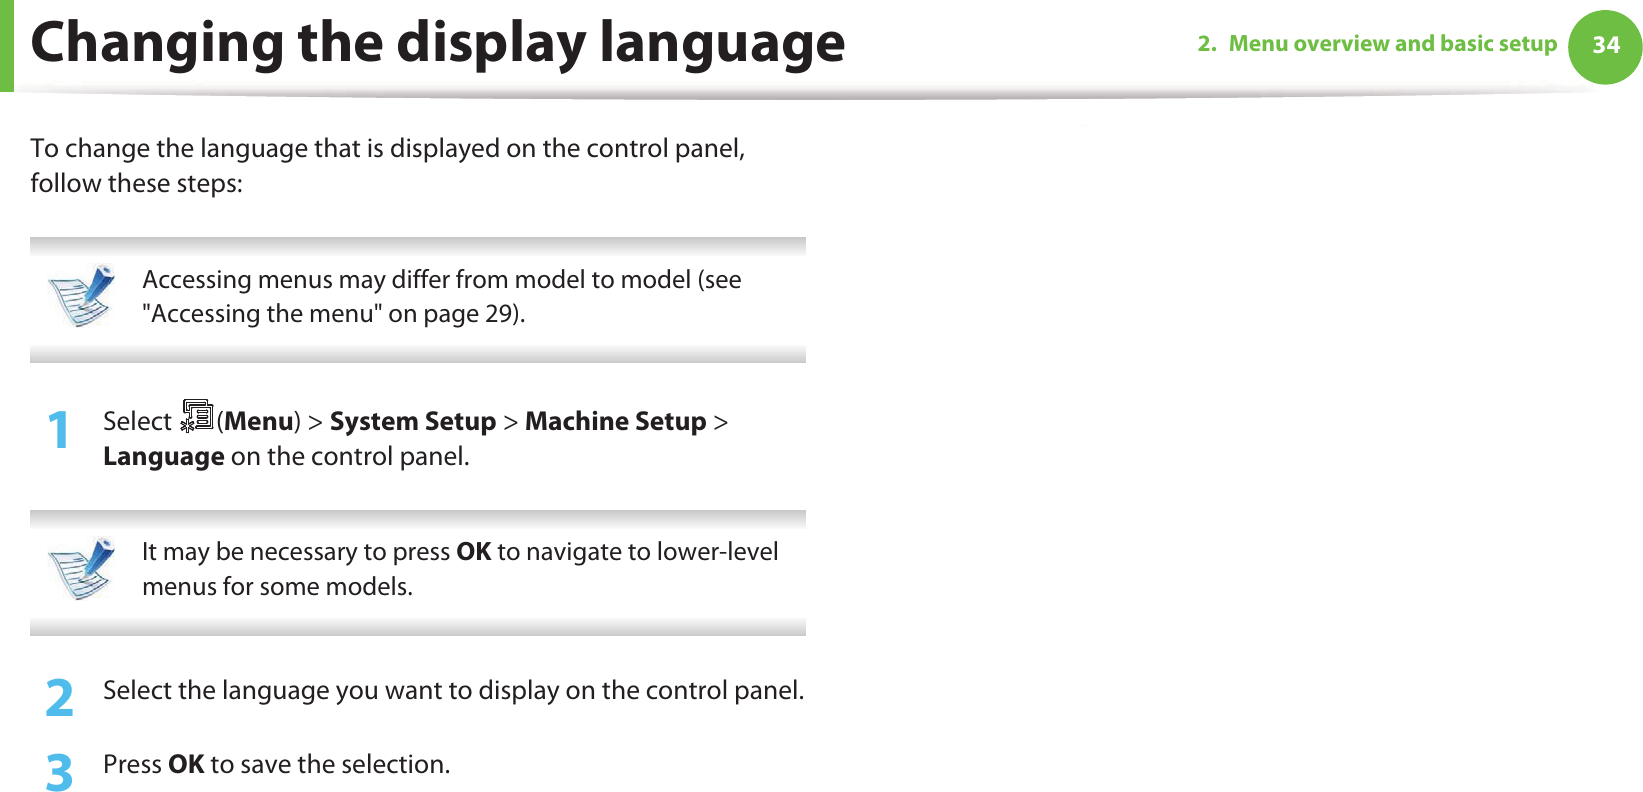 342. Menu overview and basic setupChanging the display languageTo change the language that is displayed on the control panel, follow these steps: Accessing menus may differ from model to model (see &quot;Accessing the menu&quot; on page 29). 1Select (Menu) &gt; System Setup &gt; Machine Setup &gt; Language on the control panel. It may be necessary to press OK to navigate to lower-level menus for some models. 2  Select the language you want to display on the control panel.3  Press OK to save the selection.